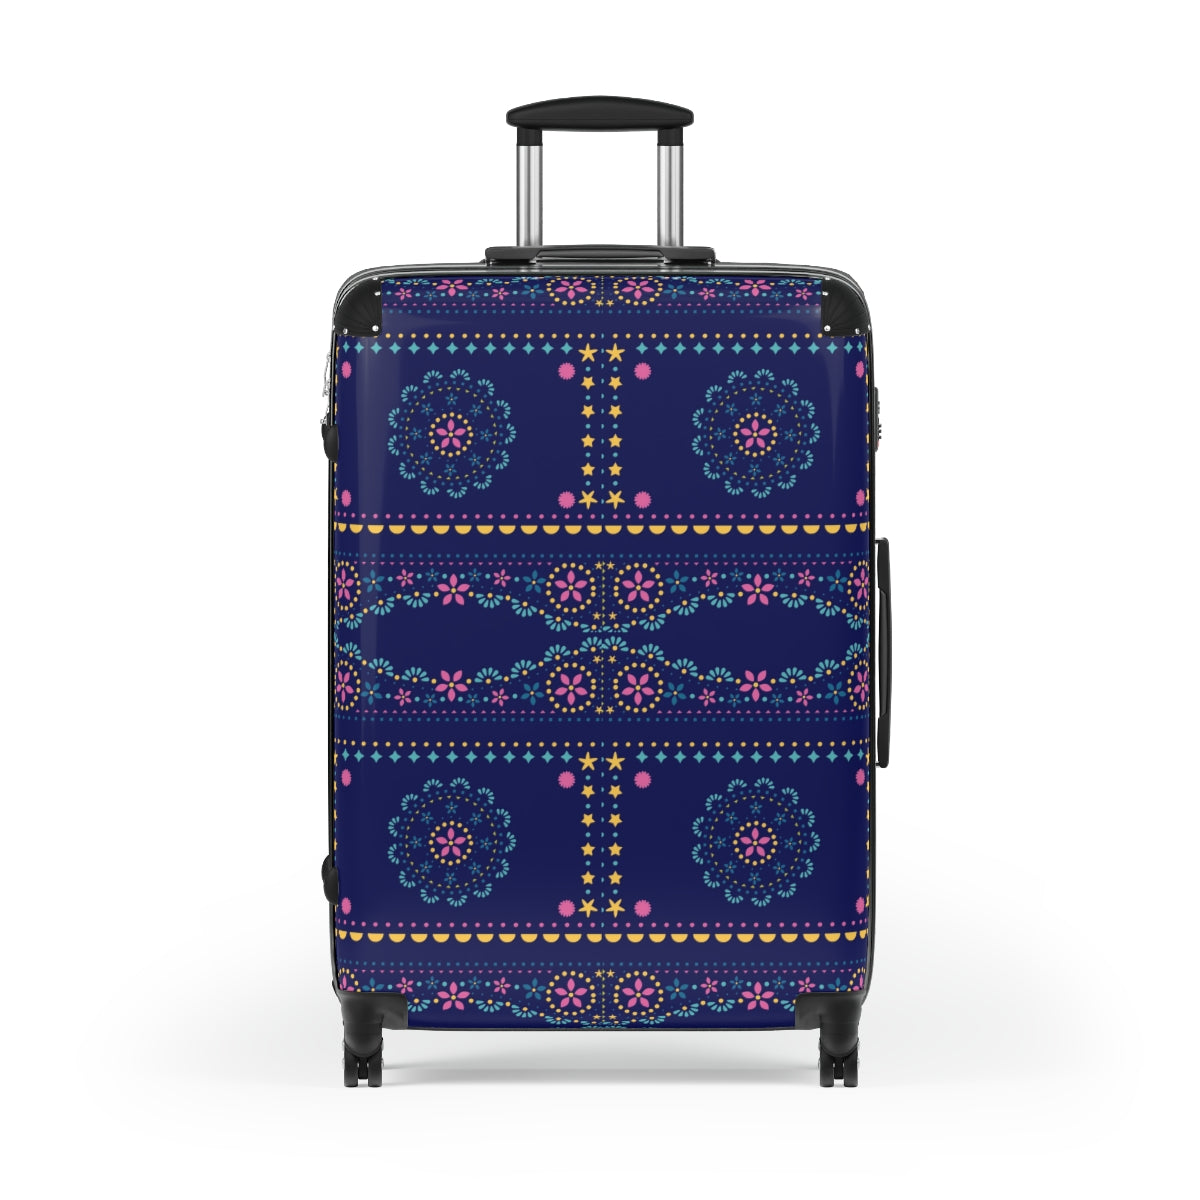 LUGGAGE WITH WHEELS, CARRY-ON SUITCASES, BOHO ART WORK PRINT, SPINNER 4 WHEELED